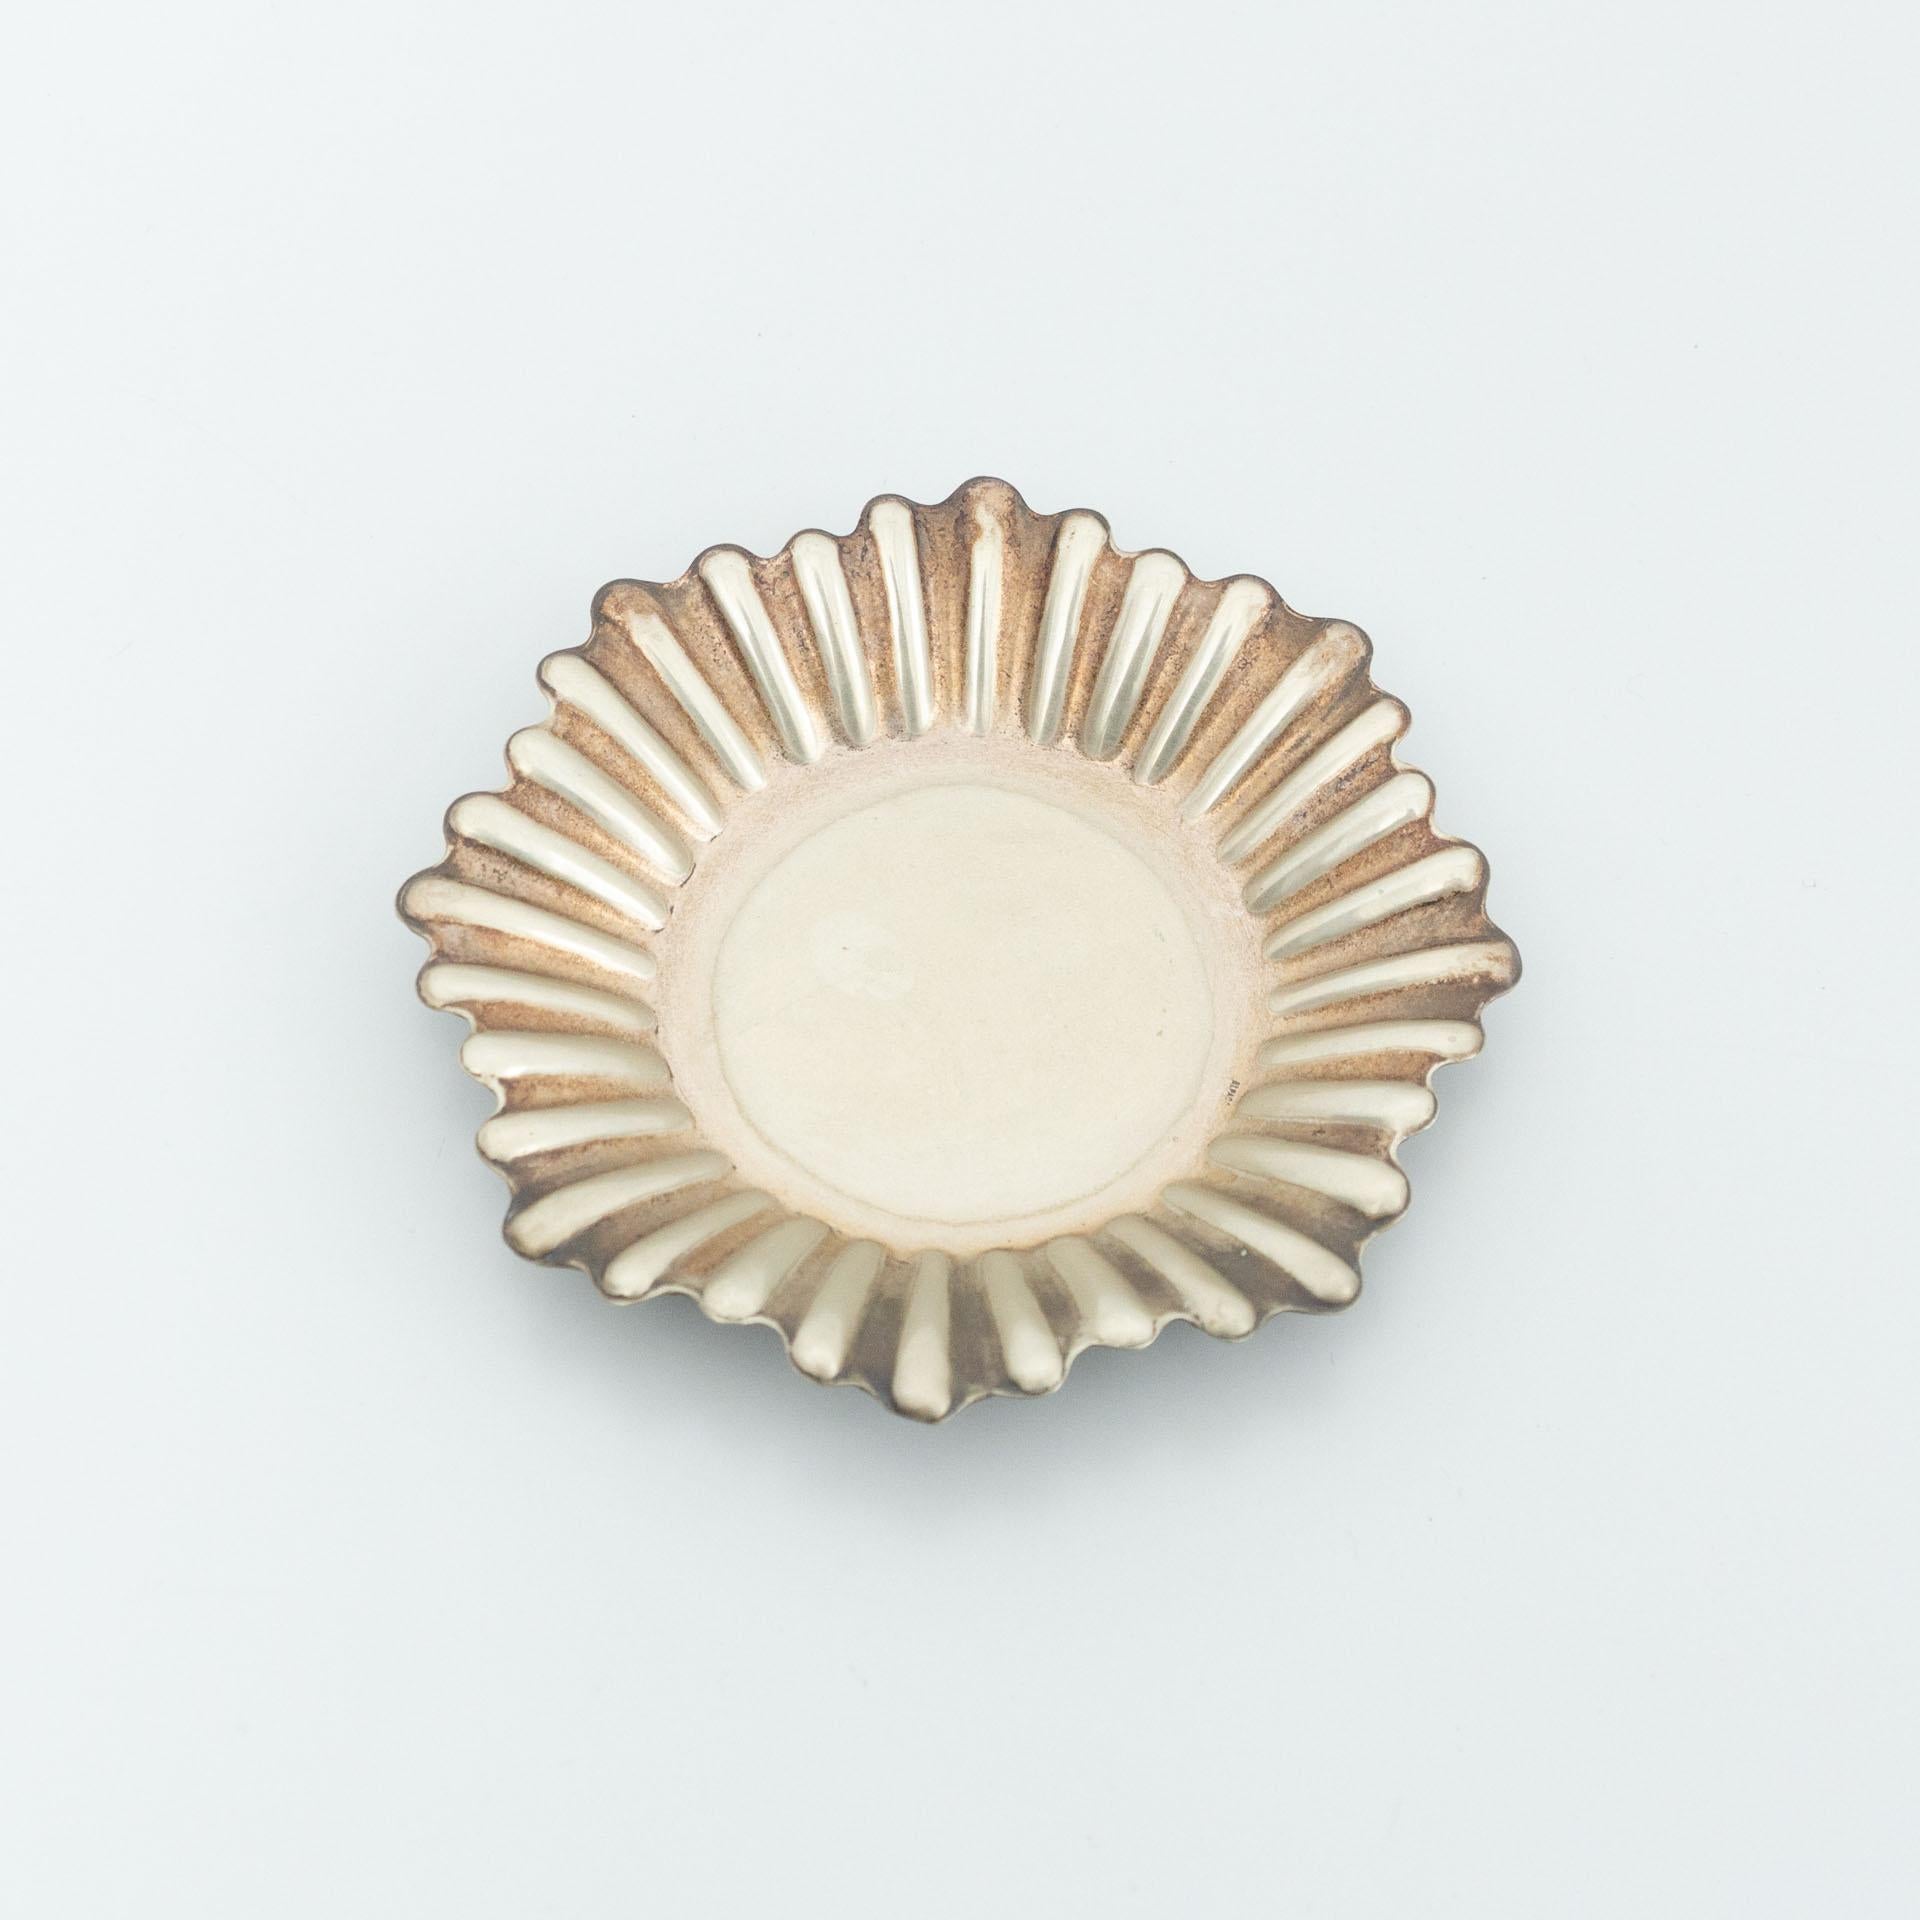 Metal ashtray by unknown manufactured from France, circa early 20th century.

In original condition, with minor wear consistent with age and use, preserving a beautiful patina.

Material:
Metal

Dimensions:
Ø 15 cm x H 1.5 cm.